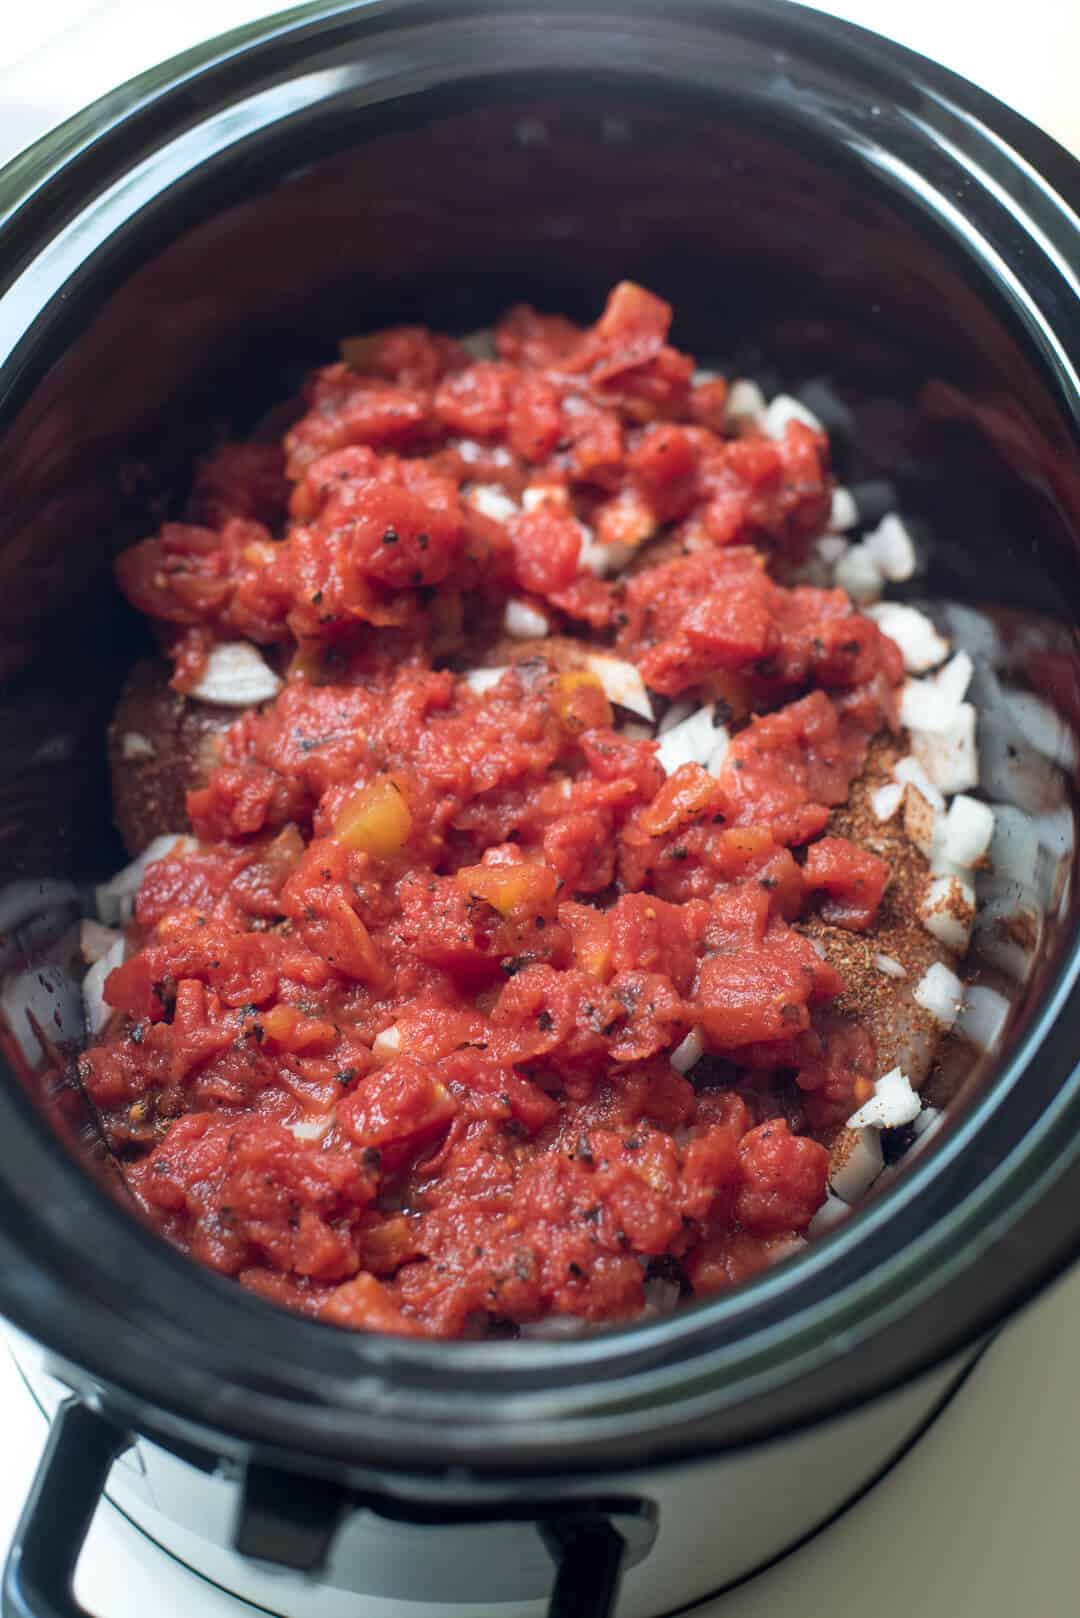 Raw seasoned chicken in a slow cooker topped with diced onion and fire roasted diced tomatoes.